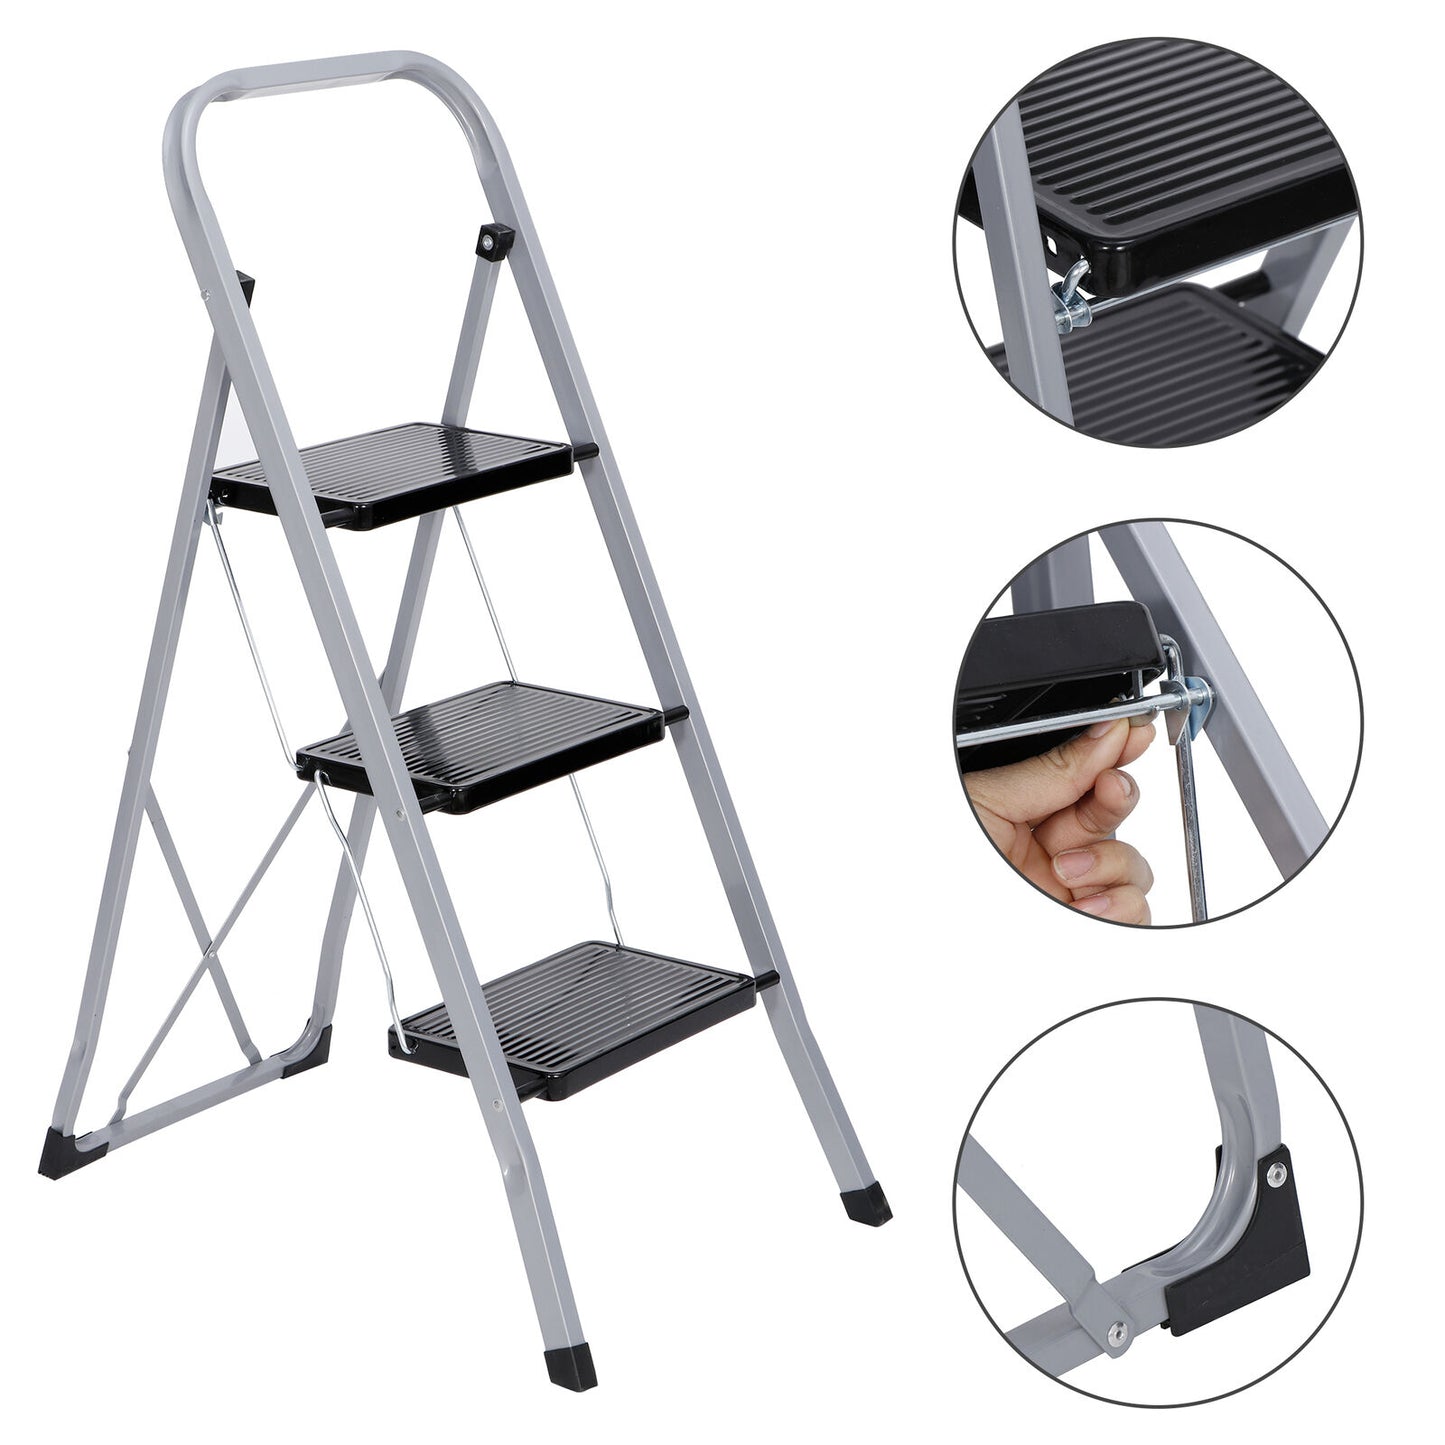 3 Steps Ladder Folding Anti-Slip Safety Tread Industrial Home Use 300Lbs Load